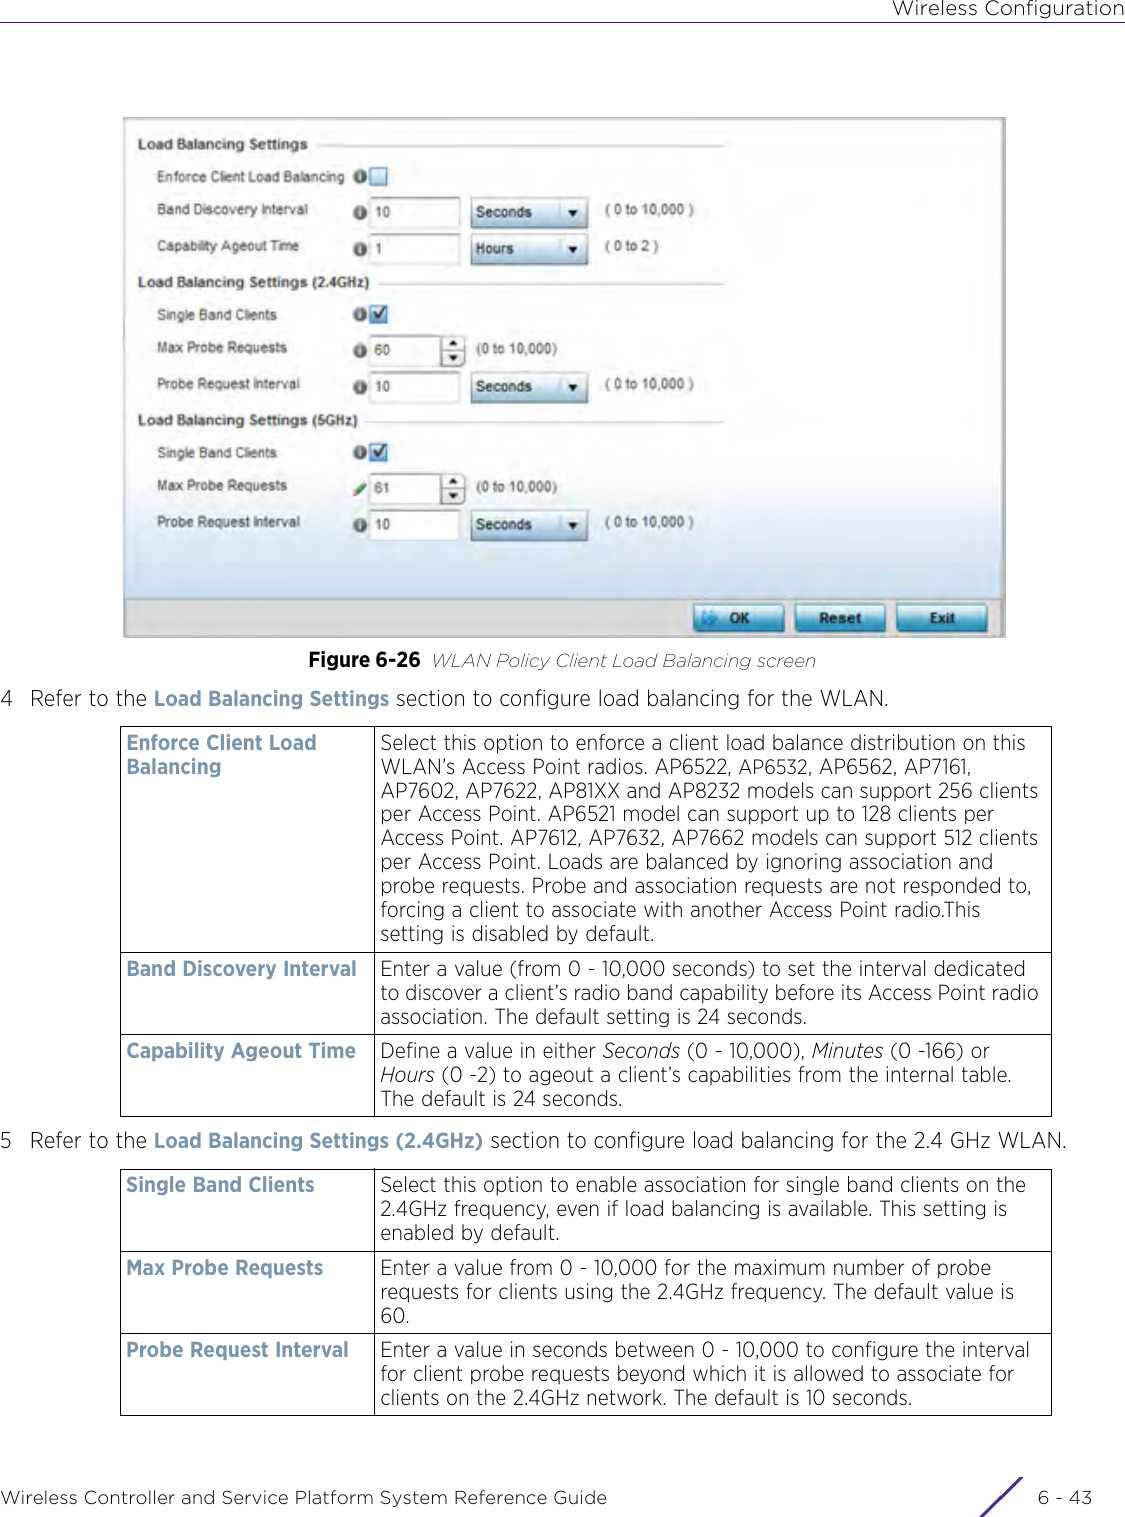 Wireless ConfigurationWireless Controller and Service Platform System Reference Guide 6 - 43Figure 6-26 WLAN Policy Client Load Balancing screen4 Refer to the Load Balancing Settings section to configure load balancing for the WLAN. 5 Refer to the Load Balancing Settings (2.4GHz) section to configure load balancing for the 2.4 GHz WLAN. Enforce Client Load Balancing Select this option to enforce a client load balance distribution on this WLAN’s Access Point radios. AP6522, AP6532, AP6562, AP7161, AP7602, AP7622, AP81XX and AP8232 models can support 256 clients per Access Point. AP6521 model can support up to 128 clients per Access Point. AP7612, AP7632, AP7662 models can support 512 clients per Access Point. Loads are balanced by ignoring association and probe requests. Probe and association requests are not responded to, forcing a client to associate with another Access Point radio.This setting is disabled by default.Band Discovery Interval Enter a value (from 0 - 10,000 seconds) to set the interval dedicated to discover a client’s radio band capability before its Access Point radio association. The default setting is 24 seconds.Capability Ageout Time Define a value in either Seconds (0 - 10,000), Minutes (0 -166) or Hours (0 -2) to ageout a client’s capabilities from the internal table. The default is 24 seconds.Single Band Clients Select this option to enable association for single band clients on the 2.4GHz frequency, even if load balancing is available. This setting is enabled by default.Max Probe Requests Enter a value from 0 - 10,000 for the maximum number of probe requests for clients using the 2.4GHz frequency. The default value is 60.Probe Request Interval Enter a value in seconds between 0 - 10,000 to configure the interval for client probe requests beyond which it is allowed to associate for clients on the 2.4GHz network. The default is 10 seconds.